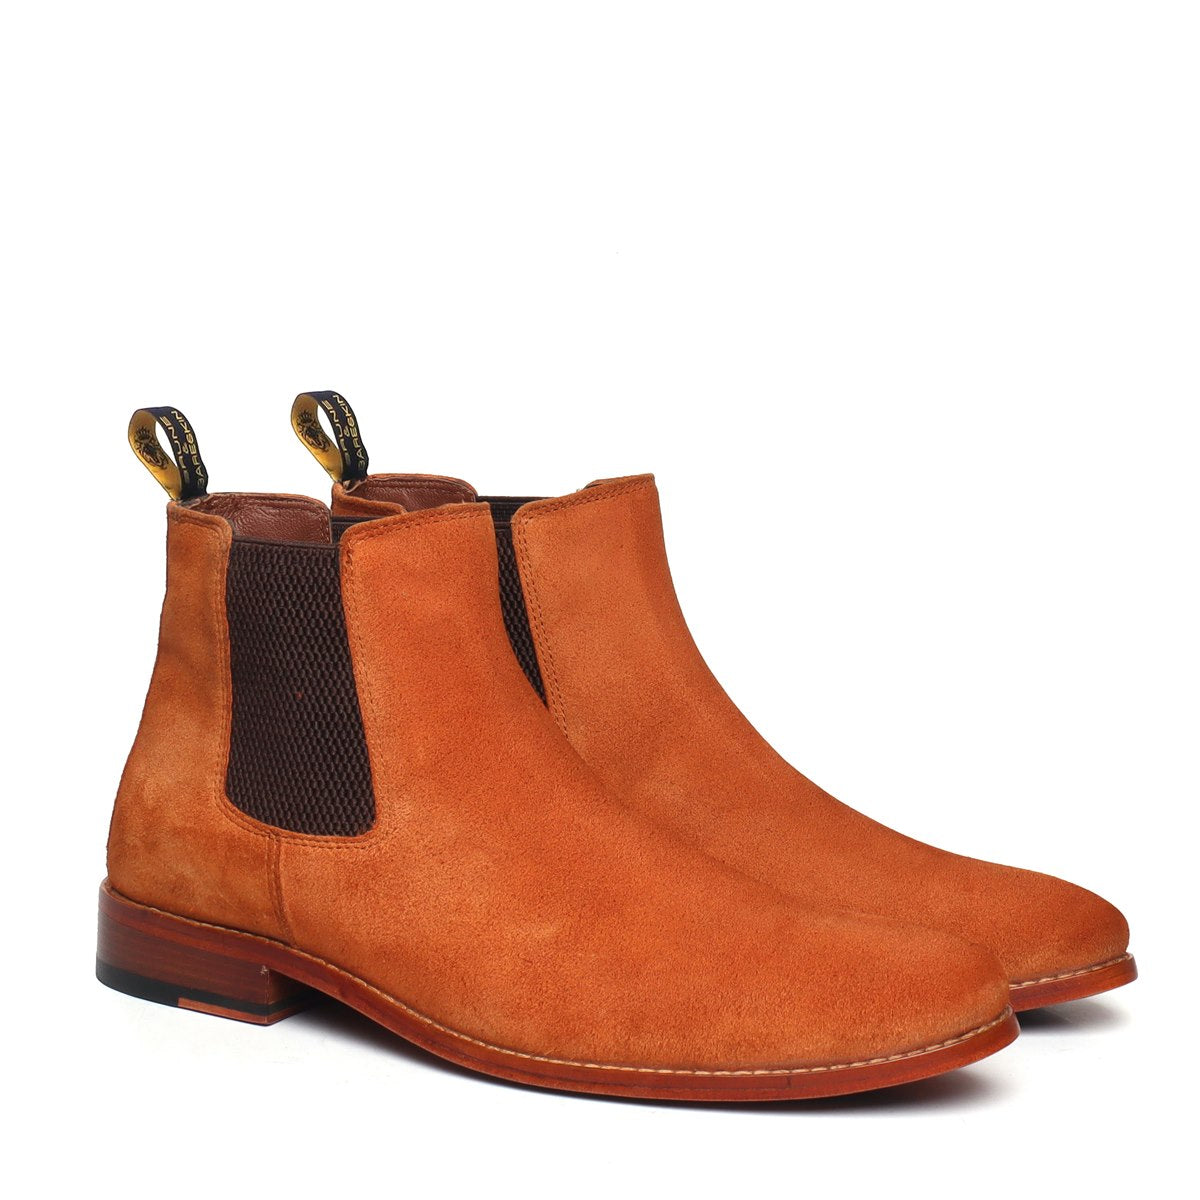 Orange Suede Leather Chelsea Boots with Leather Sole by Brune & Baresk